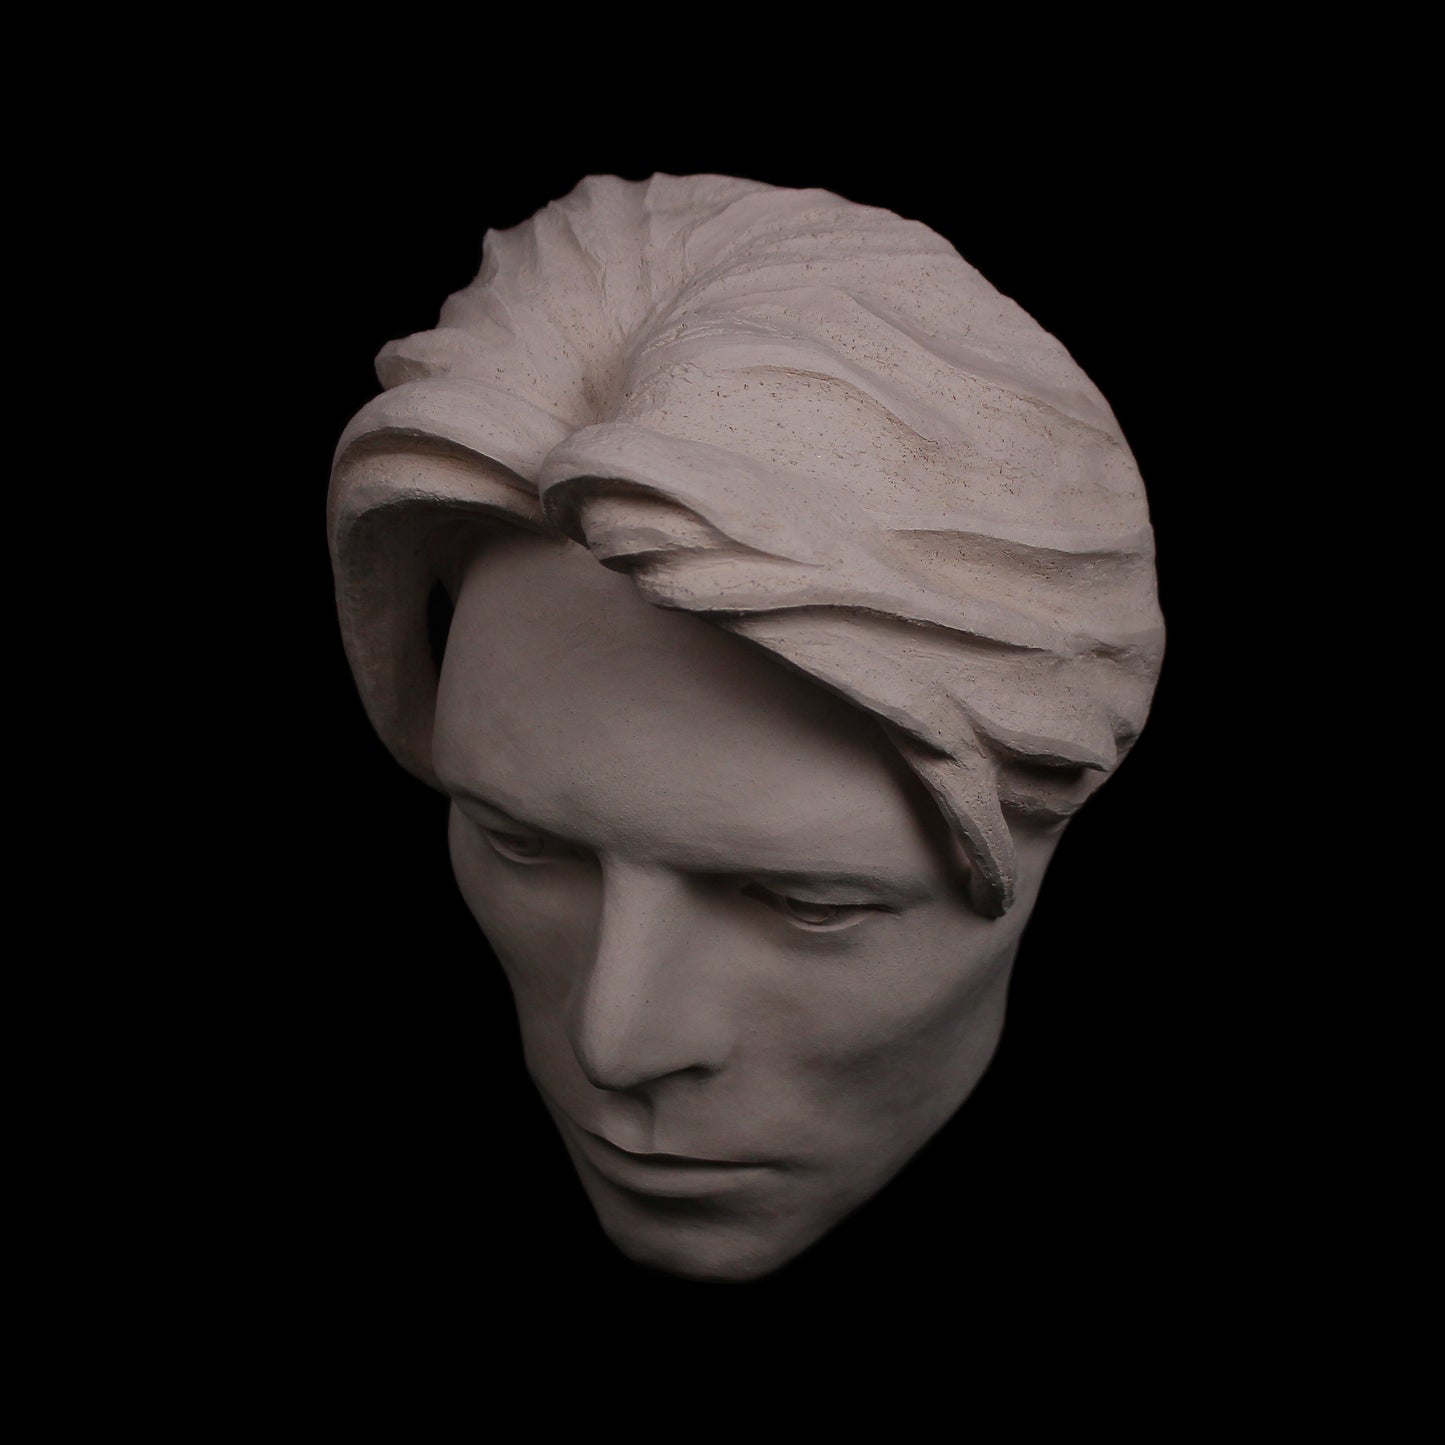 David Bowie - The Man Who Fell To Earth Mask Sculpture